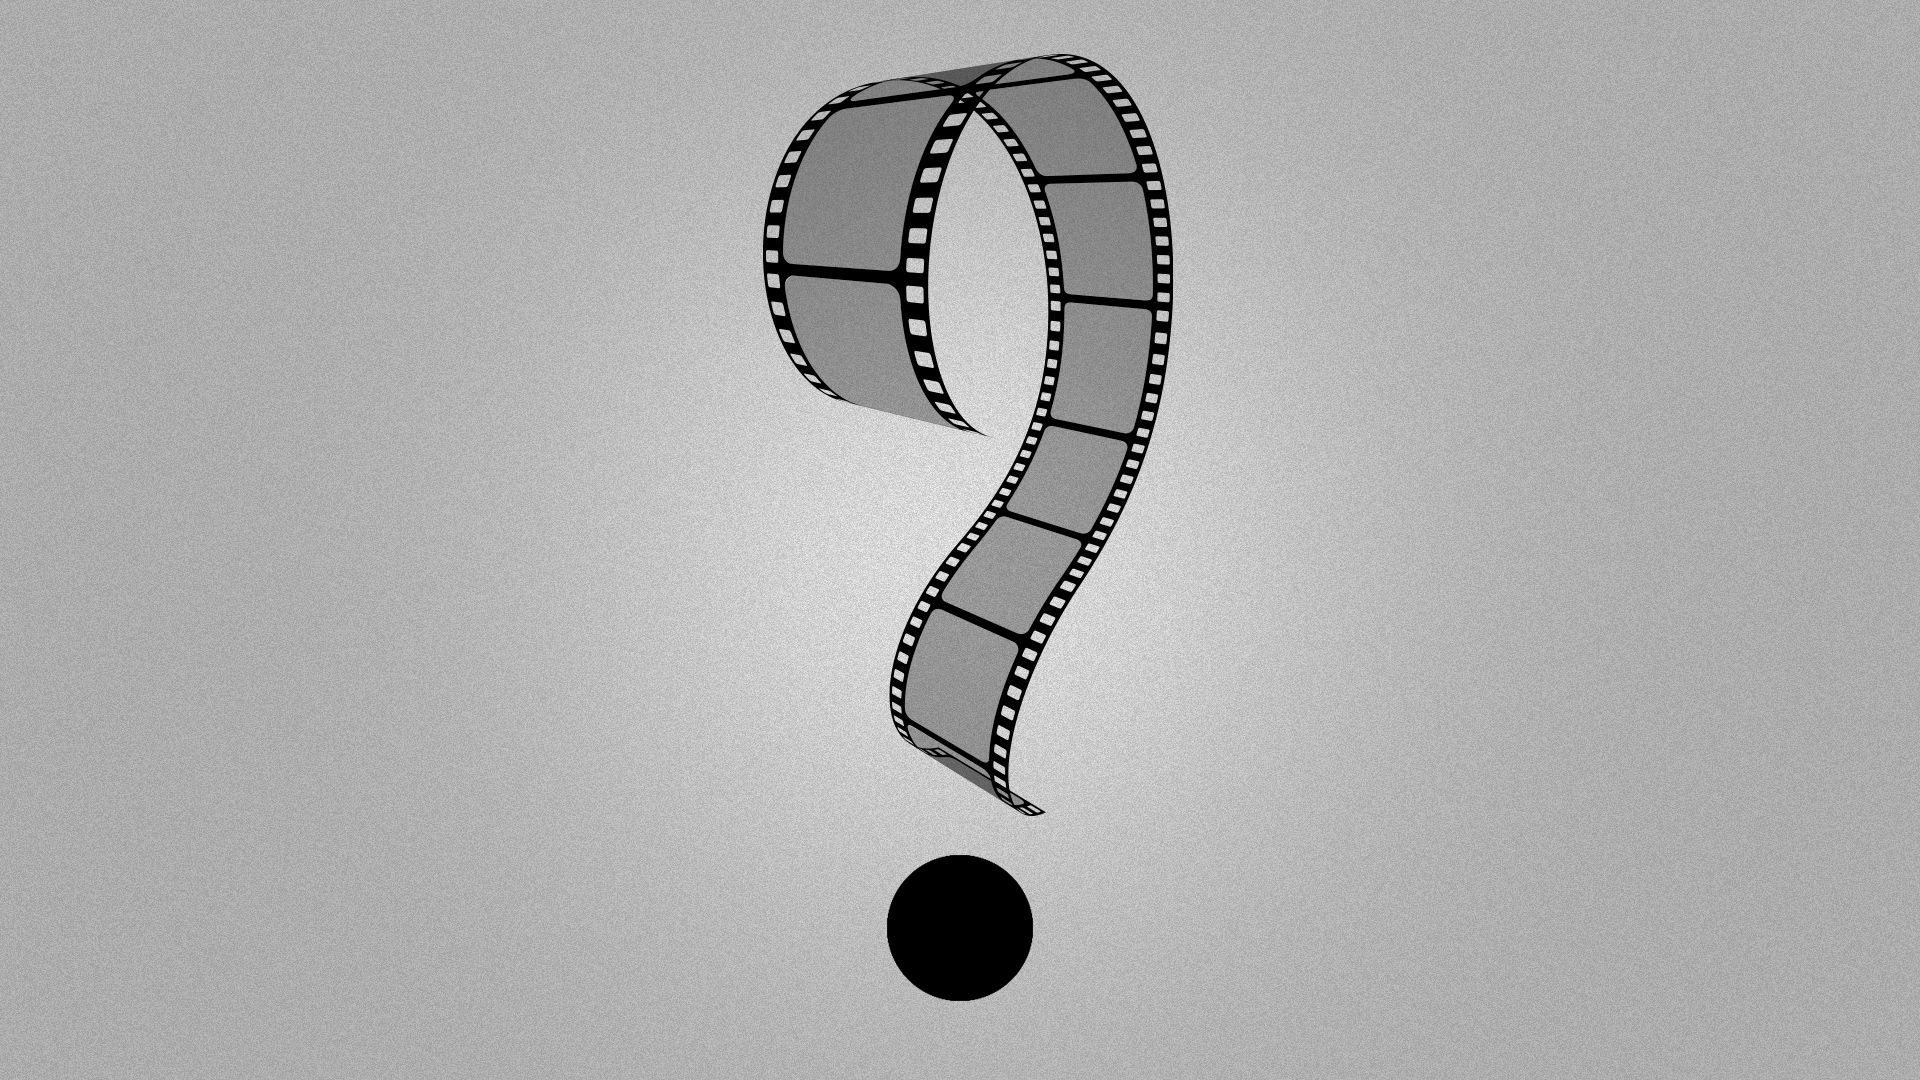 Illustration of a film strip in the shape of a question mark.